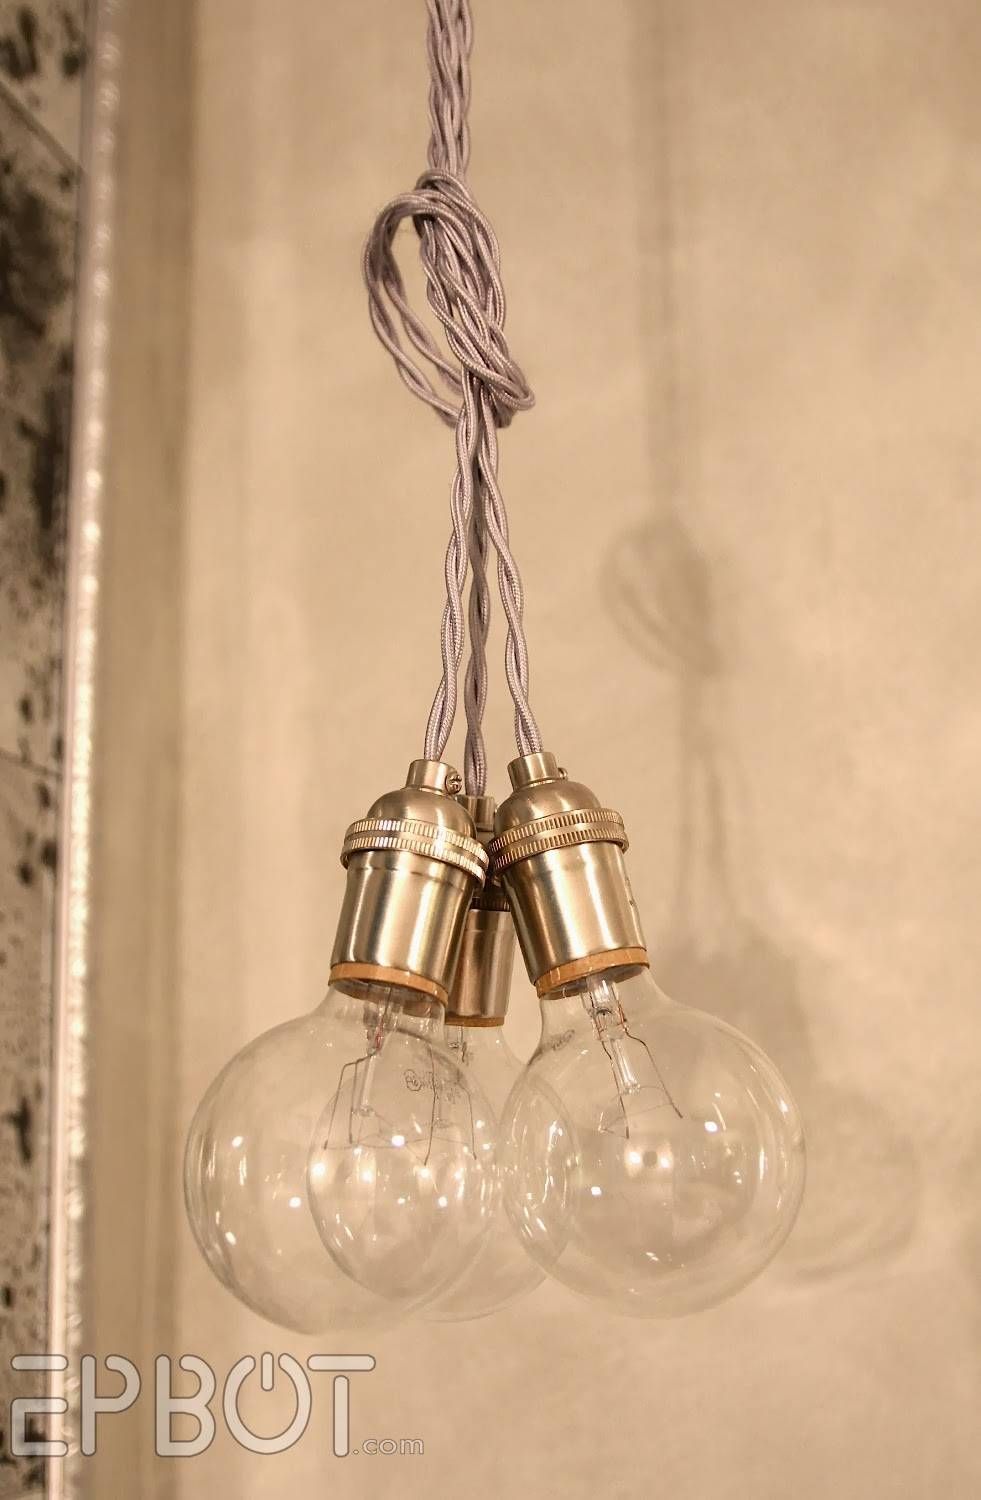 Epbot: Wire Your Own Pendant Lighting – Cheap, Easy, & Fun! Throughout Diy Pendant Lights (View 8 of 15)